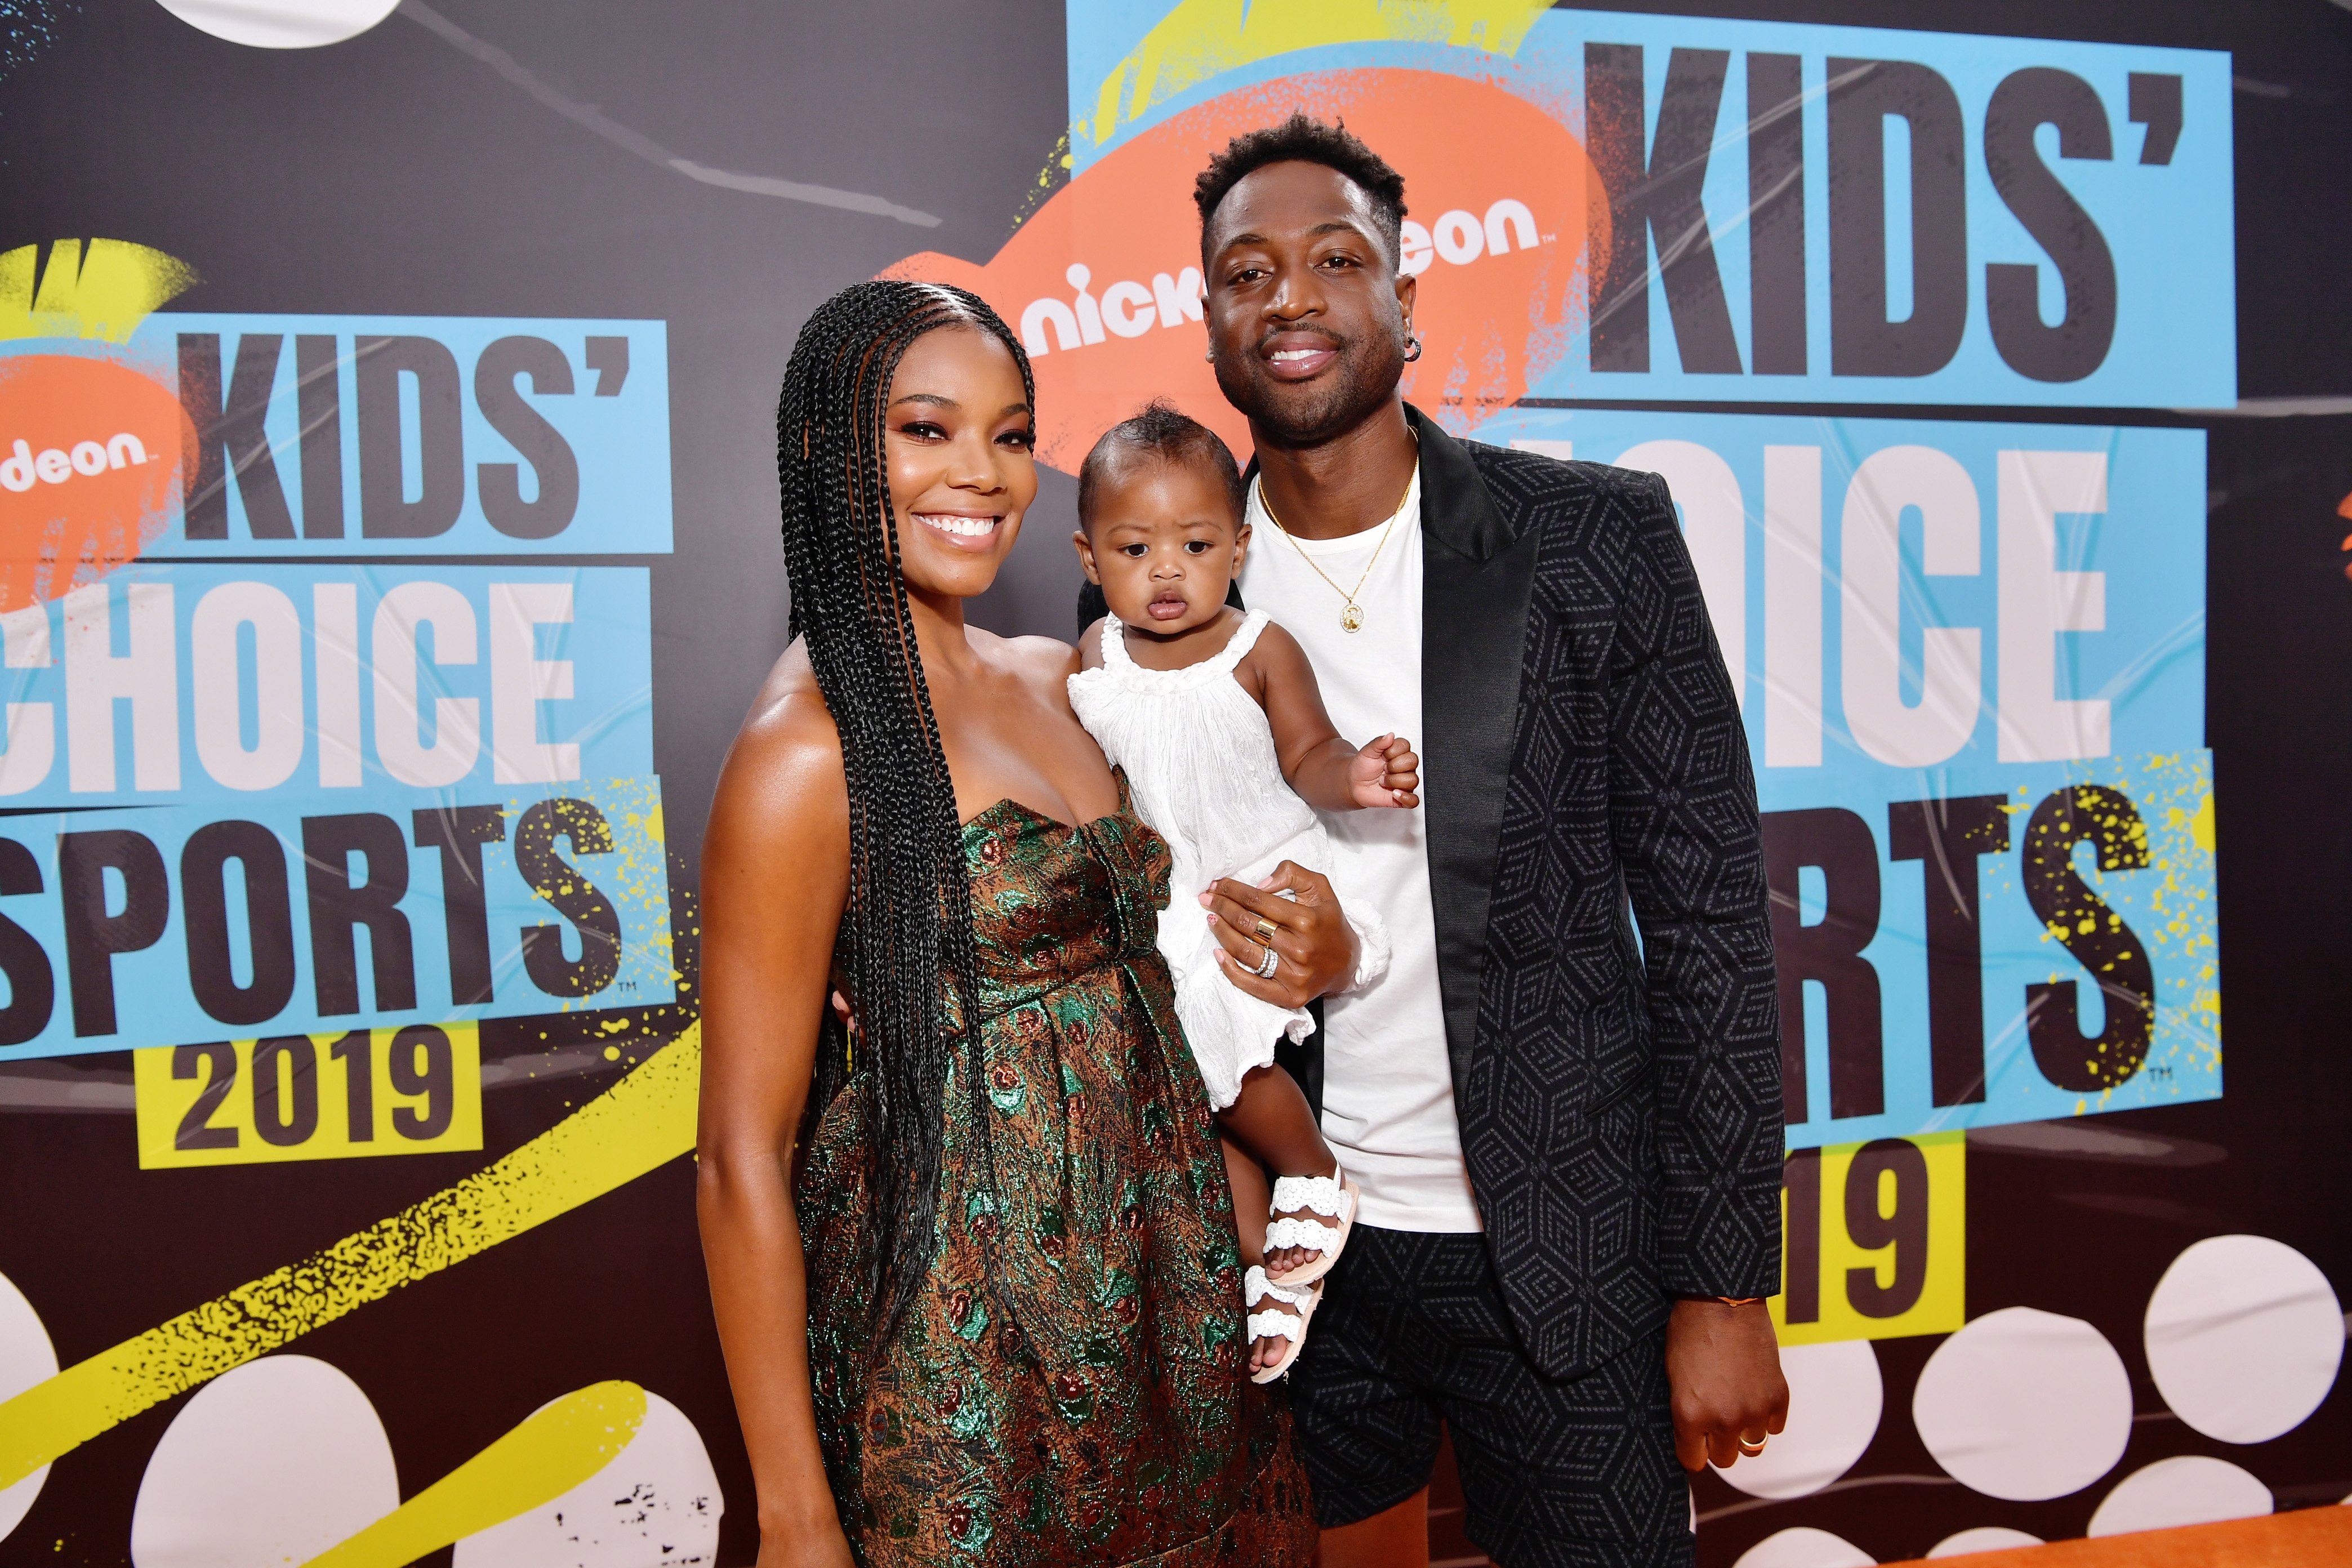 Parents Gabrielle Union and Dwyane Wade with their daughter, Kaavia James attending Nickelodeon KIds' Choice Sports 2019. | Source: Getty Images